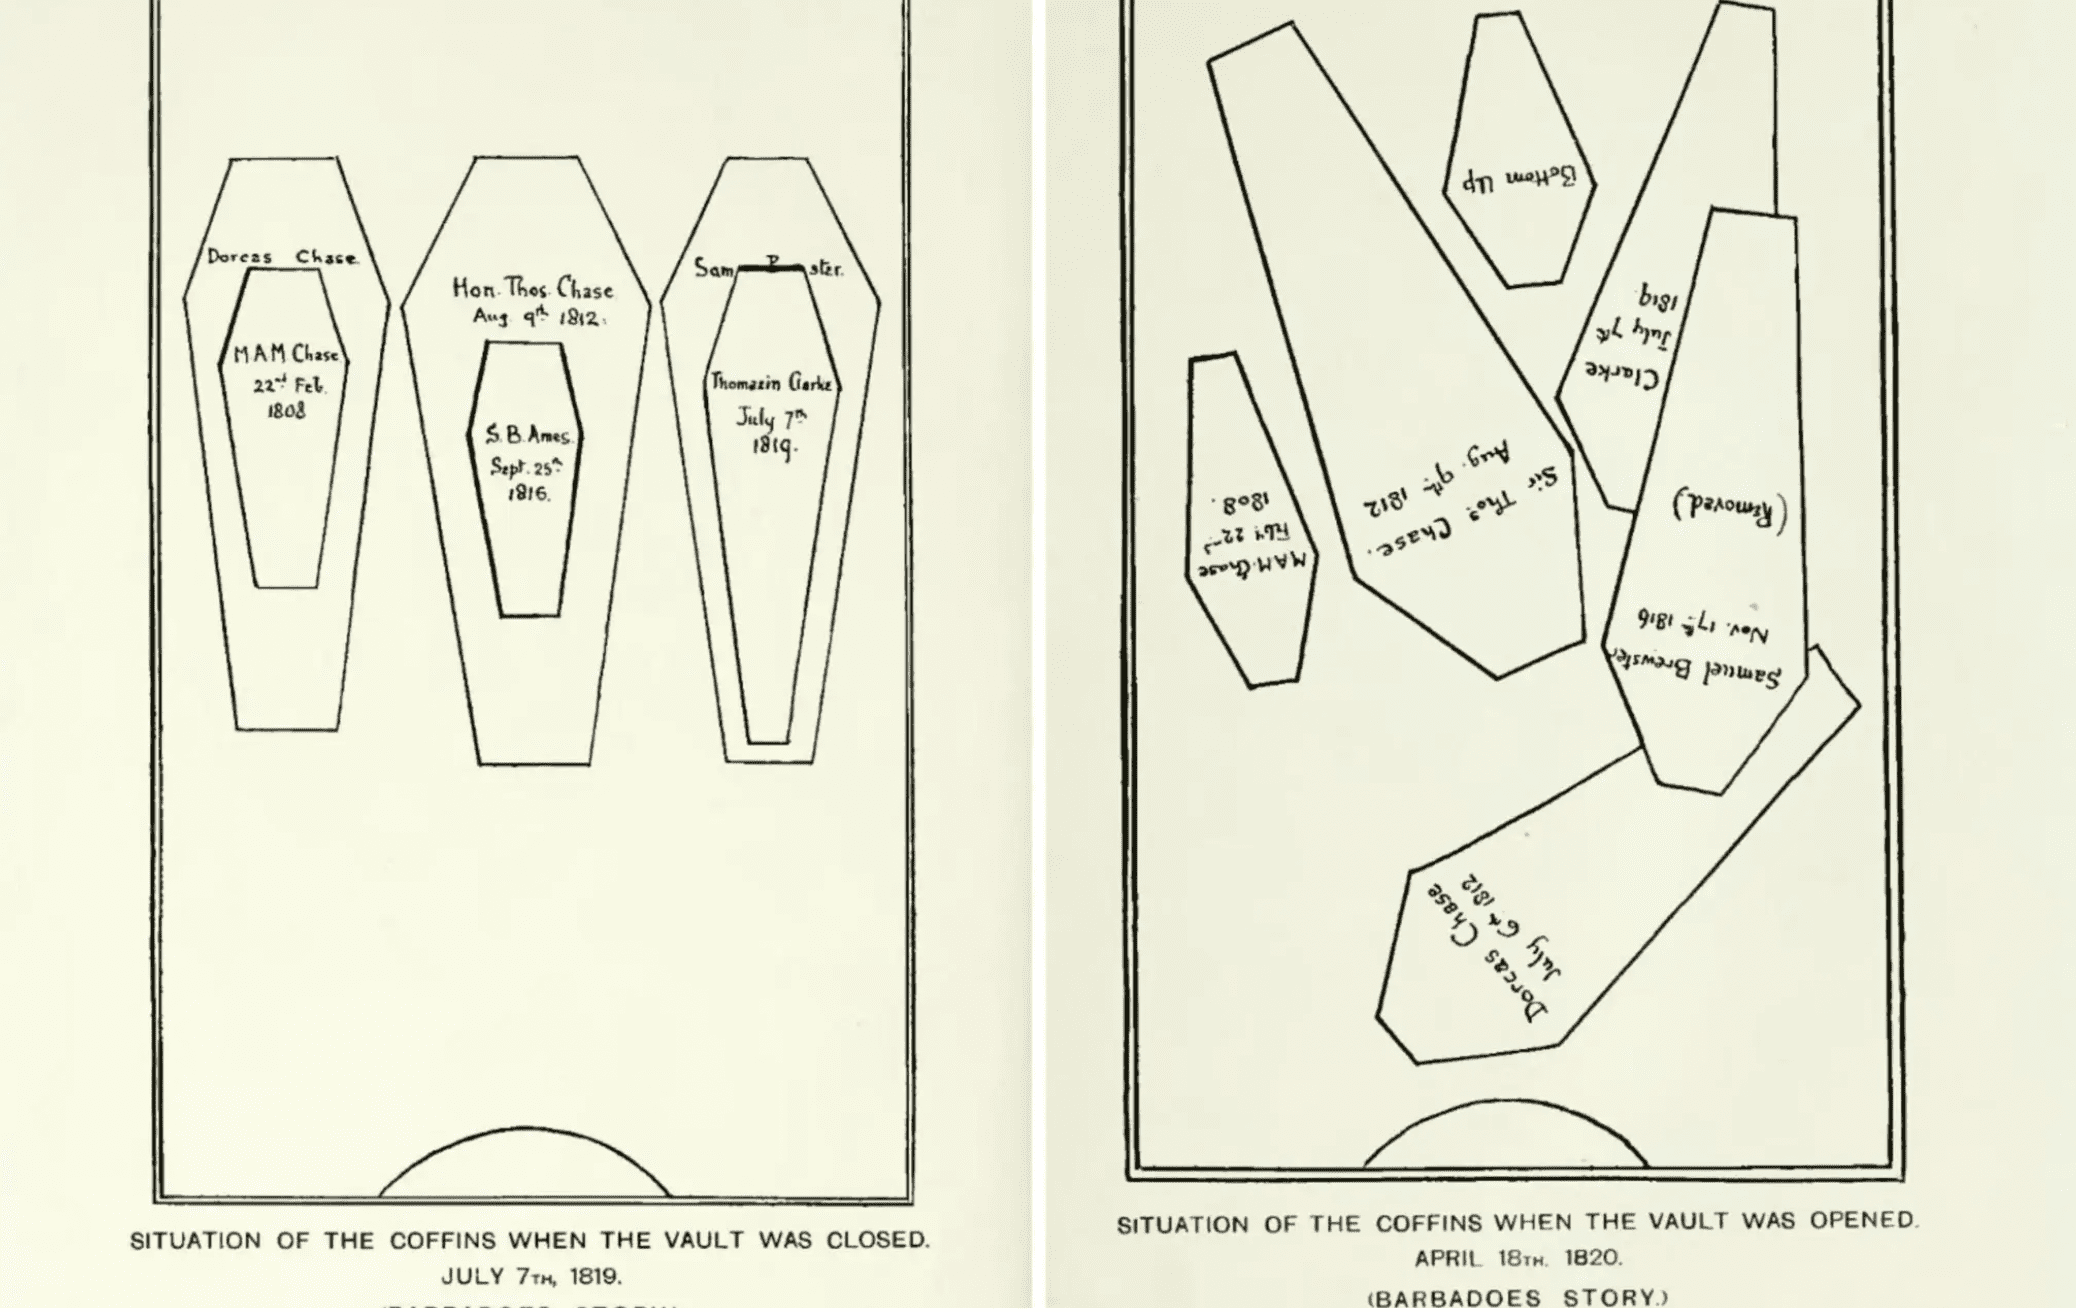 To show the movement of the tombs as published